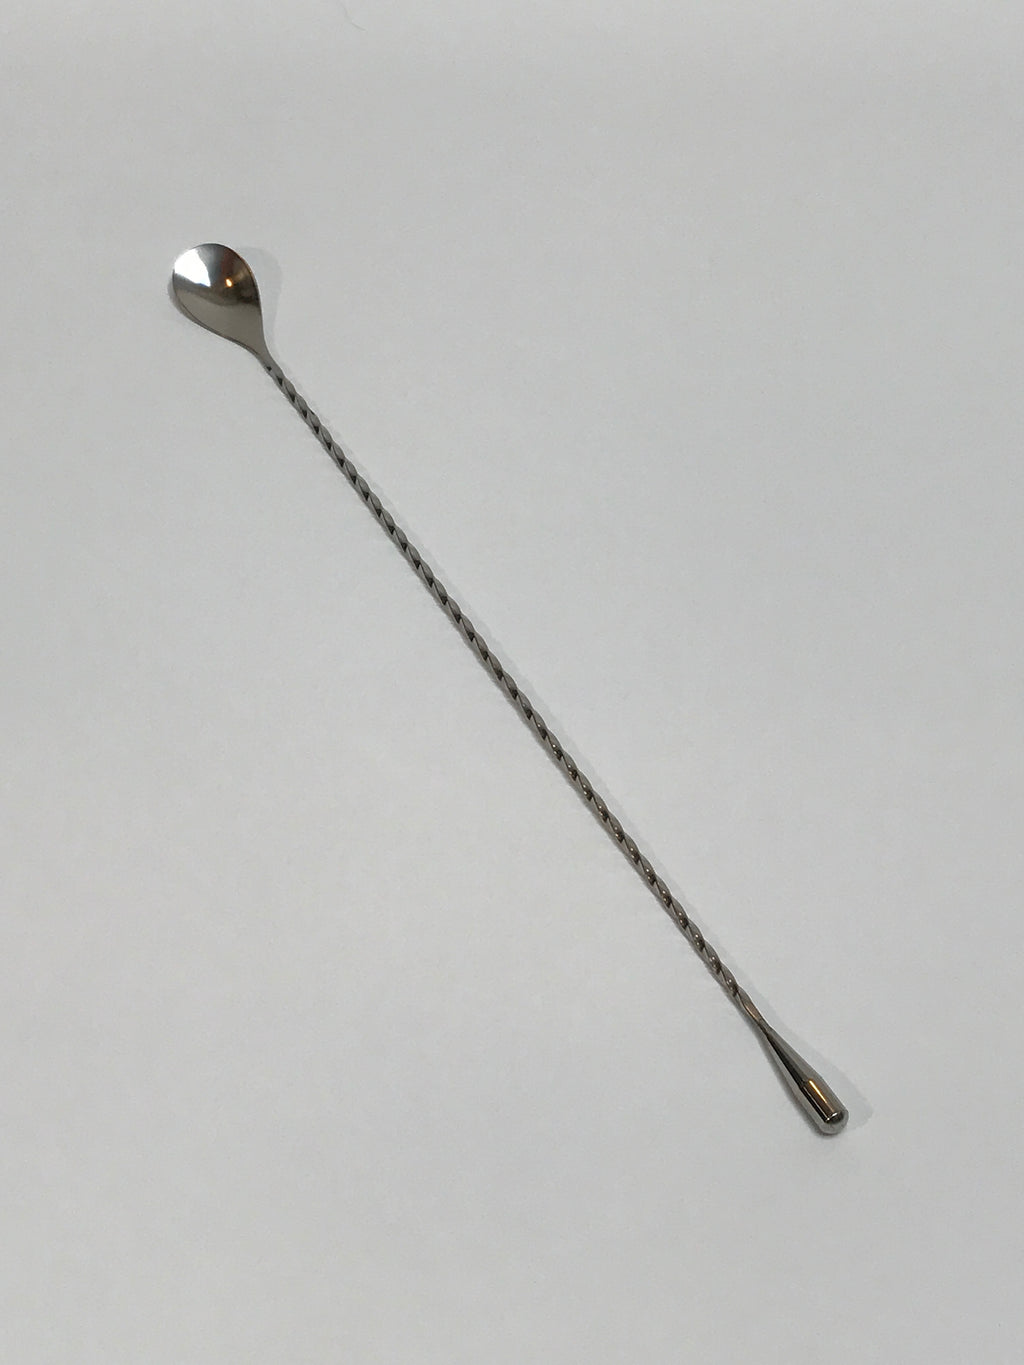 Stainless Weighted Barspoon